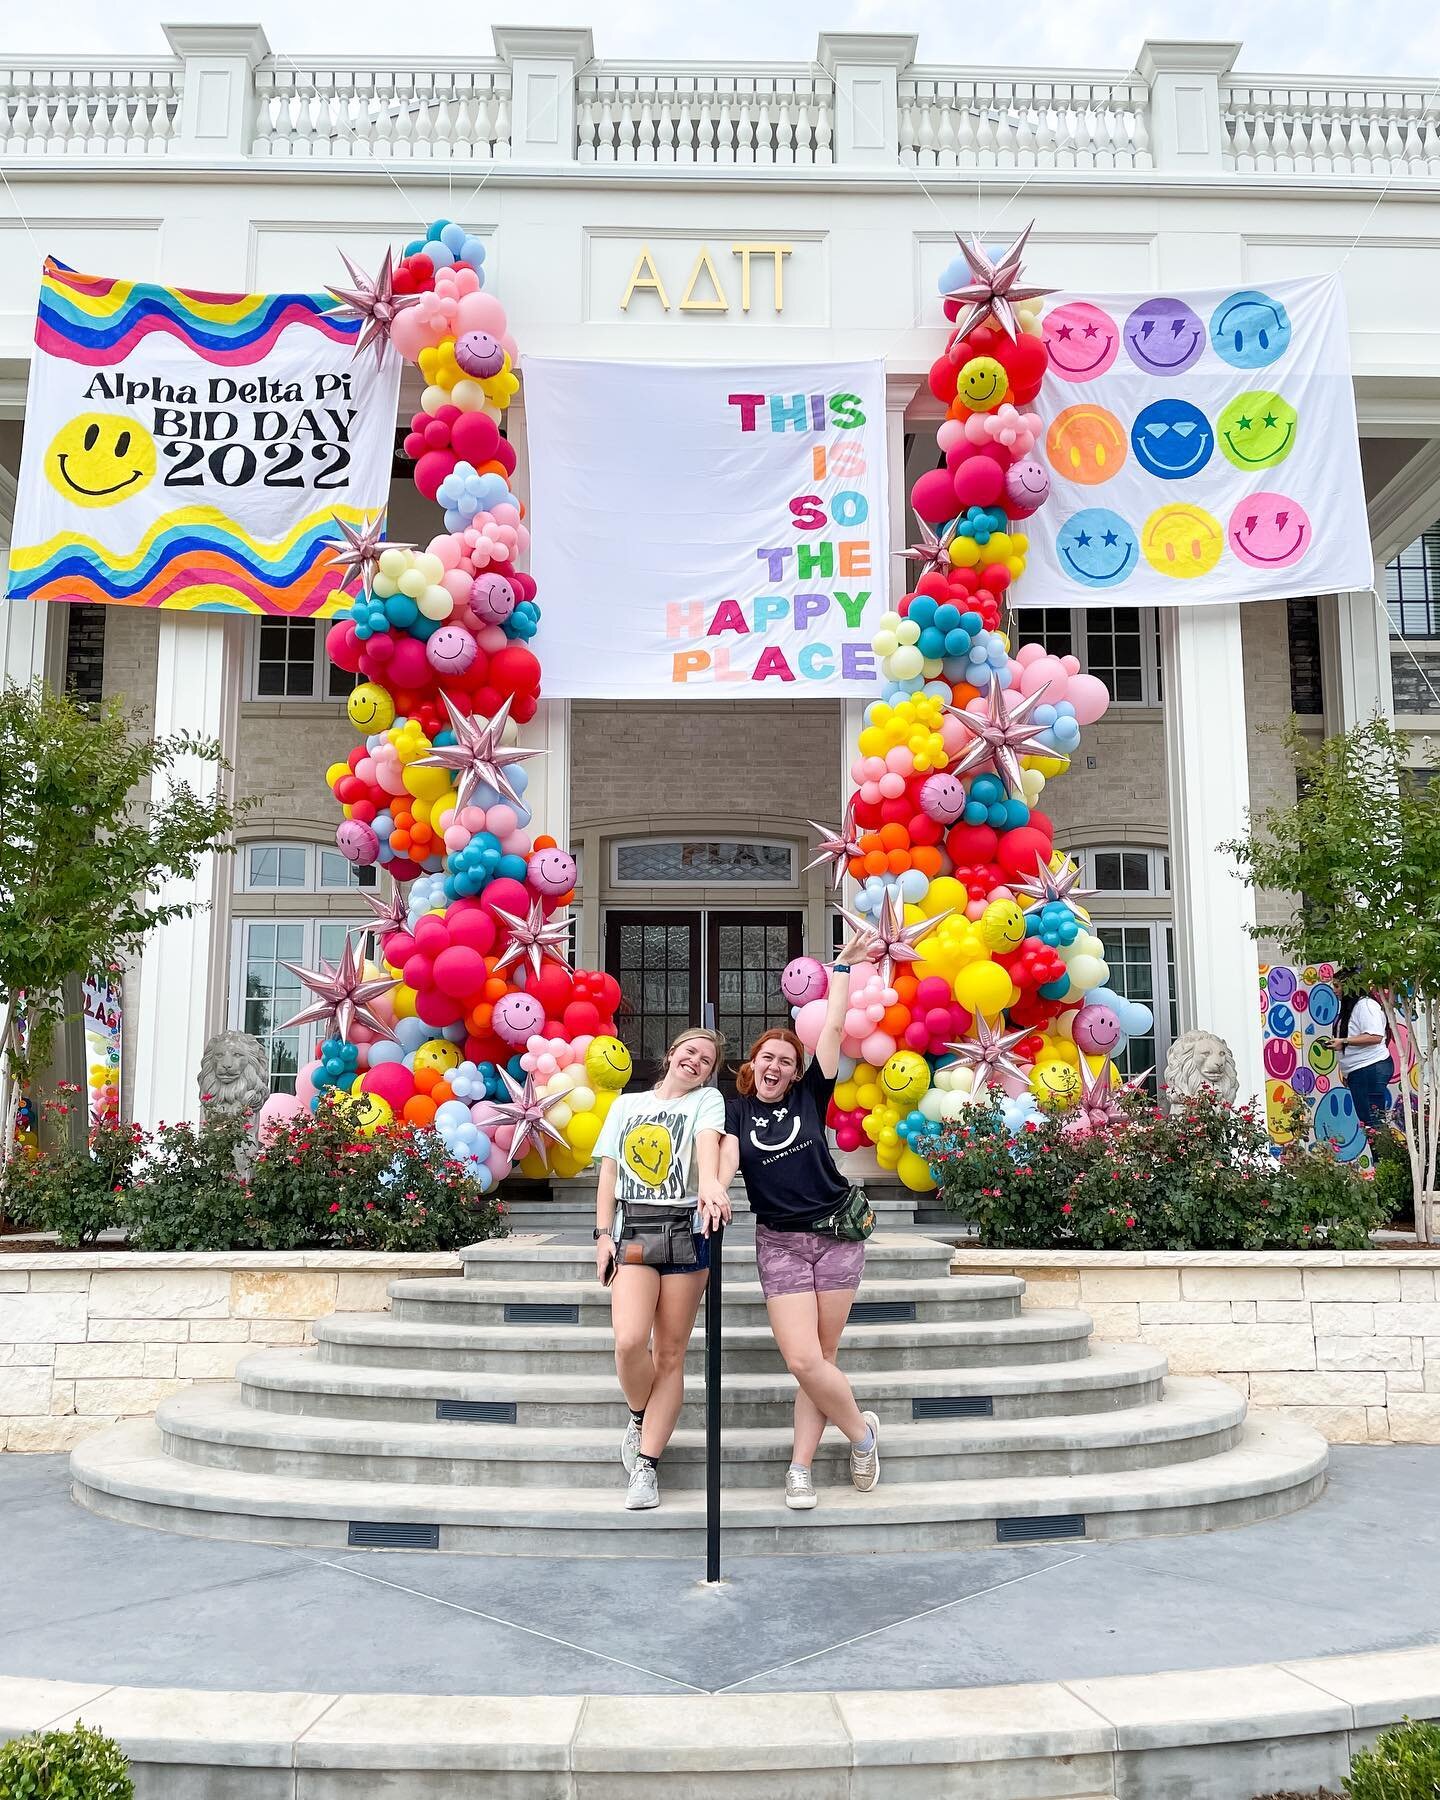 This is so the happy place 😊✨💕

The most fun weekend installing for @okstate rush week! Kicking off our posts with the happiest design for @okstateadpi 🤩